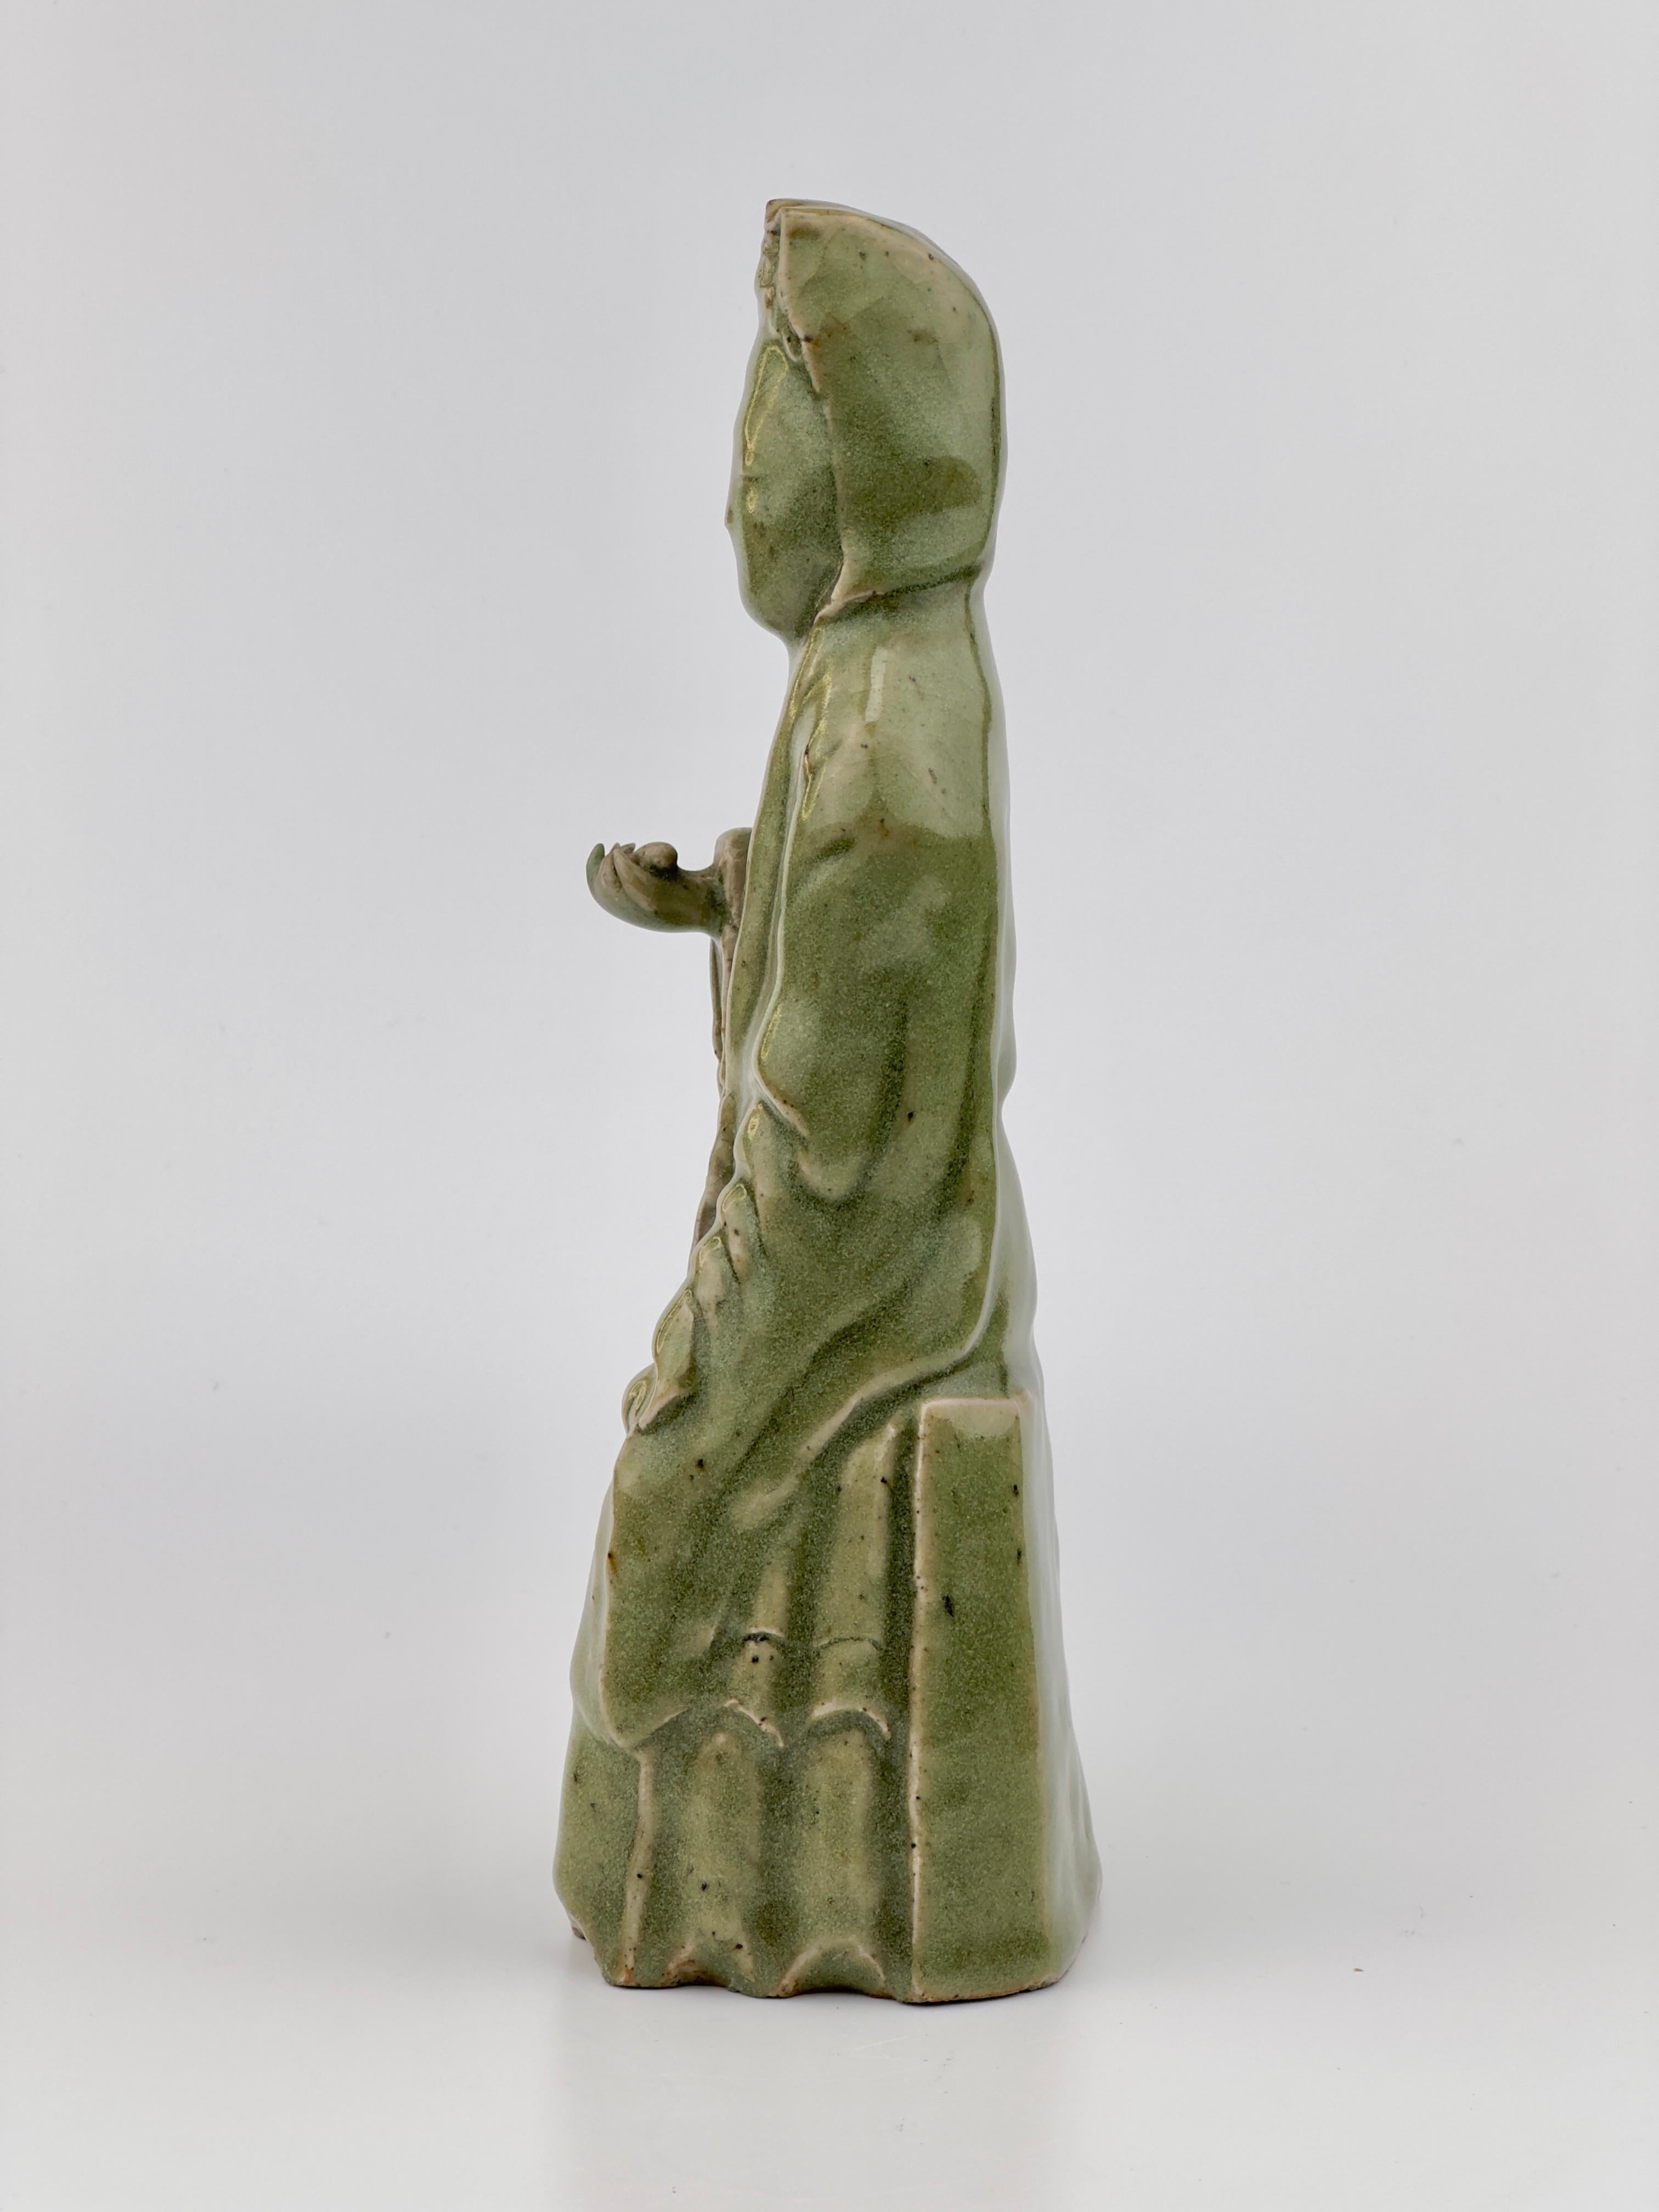 This sculpture is a Longquan celadon from the Ming Dynasty, renowned for its rich and jade-like green glaze. The figurine is likely a representation of a Buddhist deity or a revered scholar, showcasing the calm aesthetic expressions and graceful